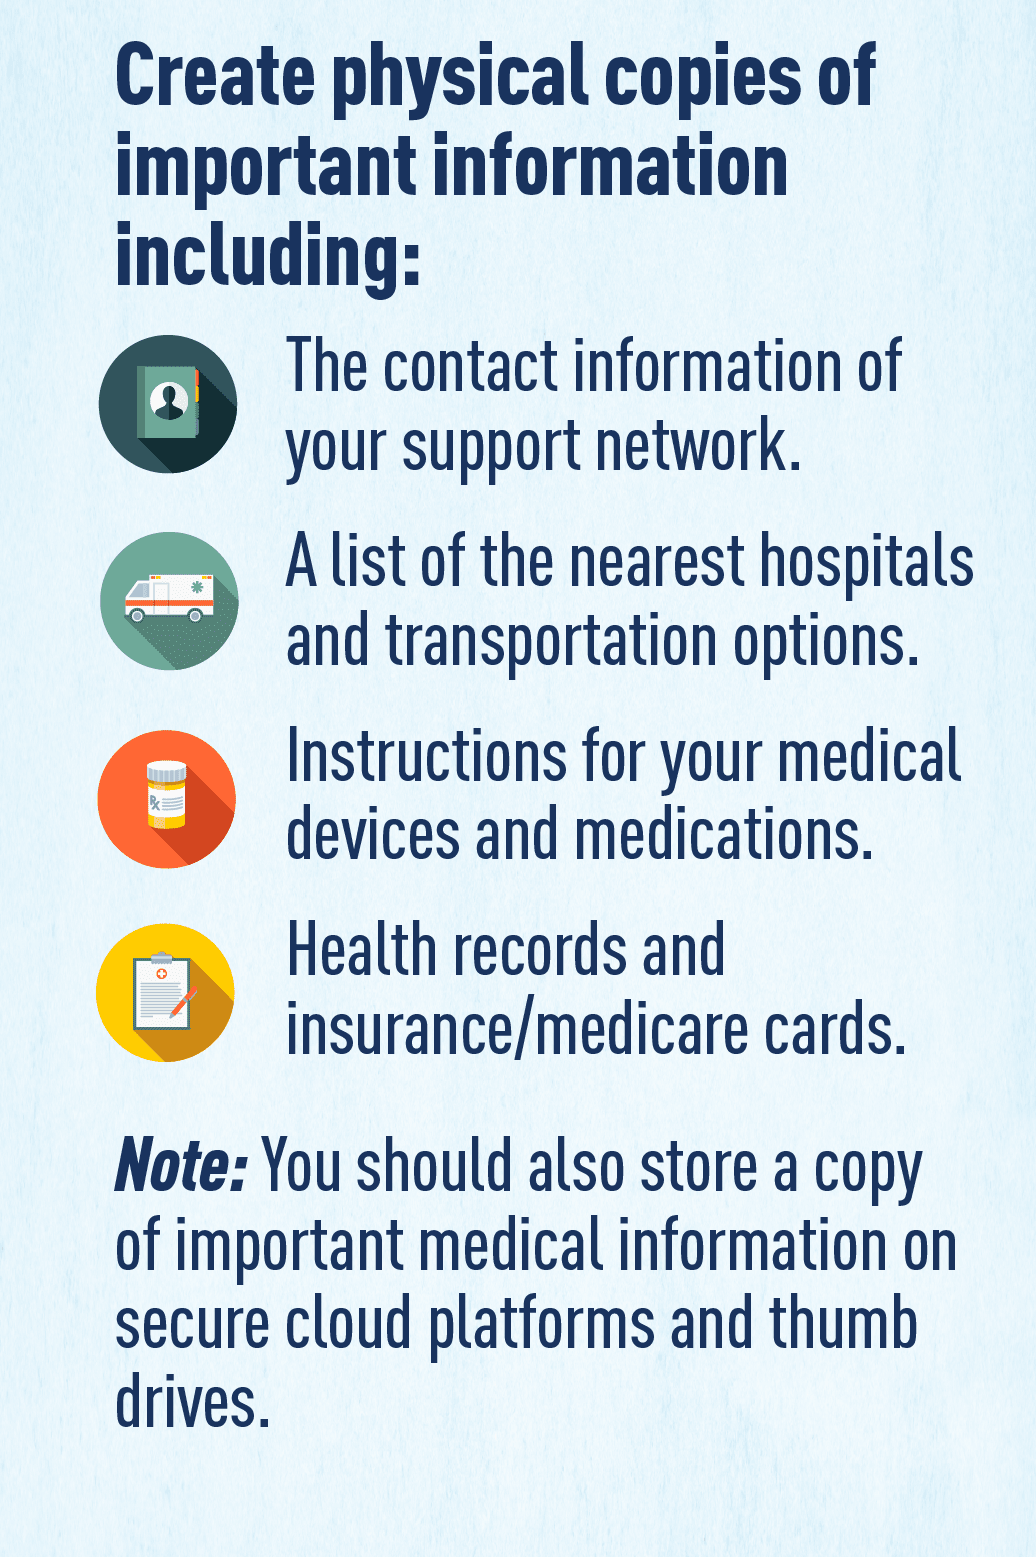 Images: Graphic of contact book, ambulance, medicine jar, and medical files. Text: Create physical copies of important information including: The contact information of your support network. A list of the nearest hospitals and transportation options. Instructions for your medical devices and medications. Health records and insurance/medicare cards. Note: You should also store a copy of important medical information on secure cloud platforms and thumb drives.